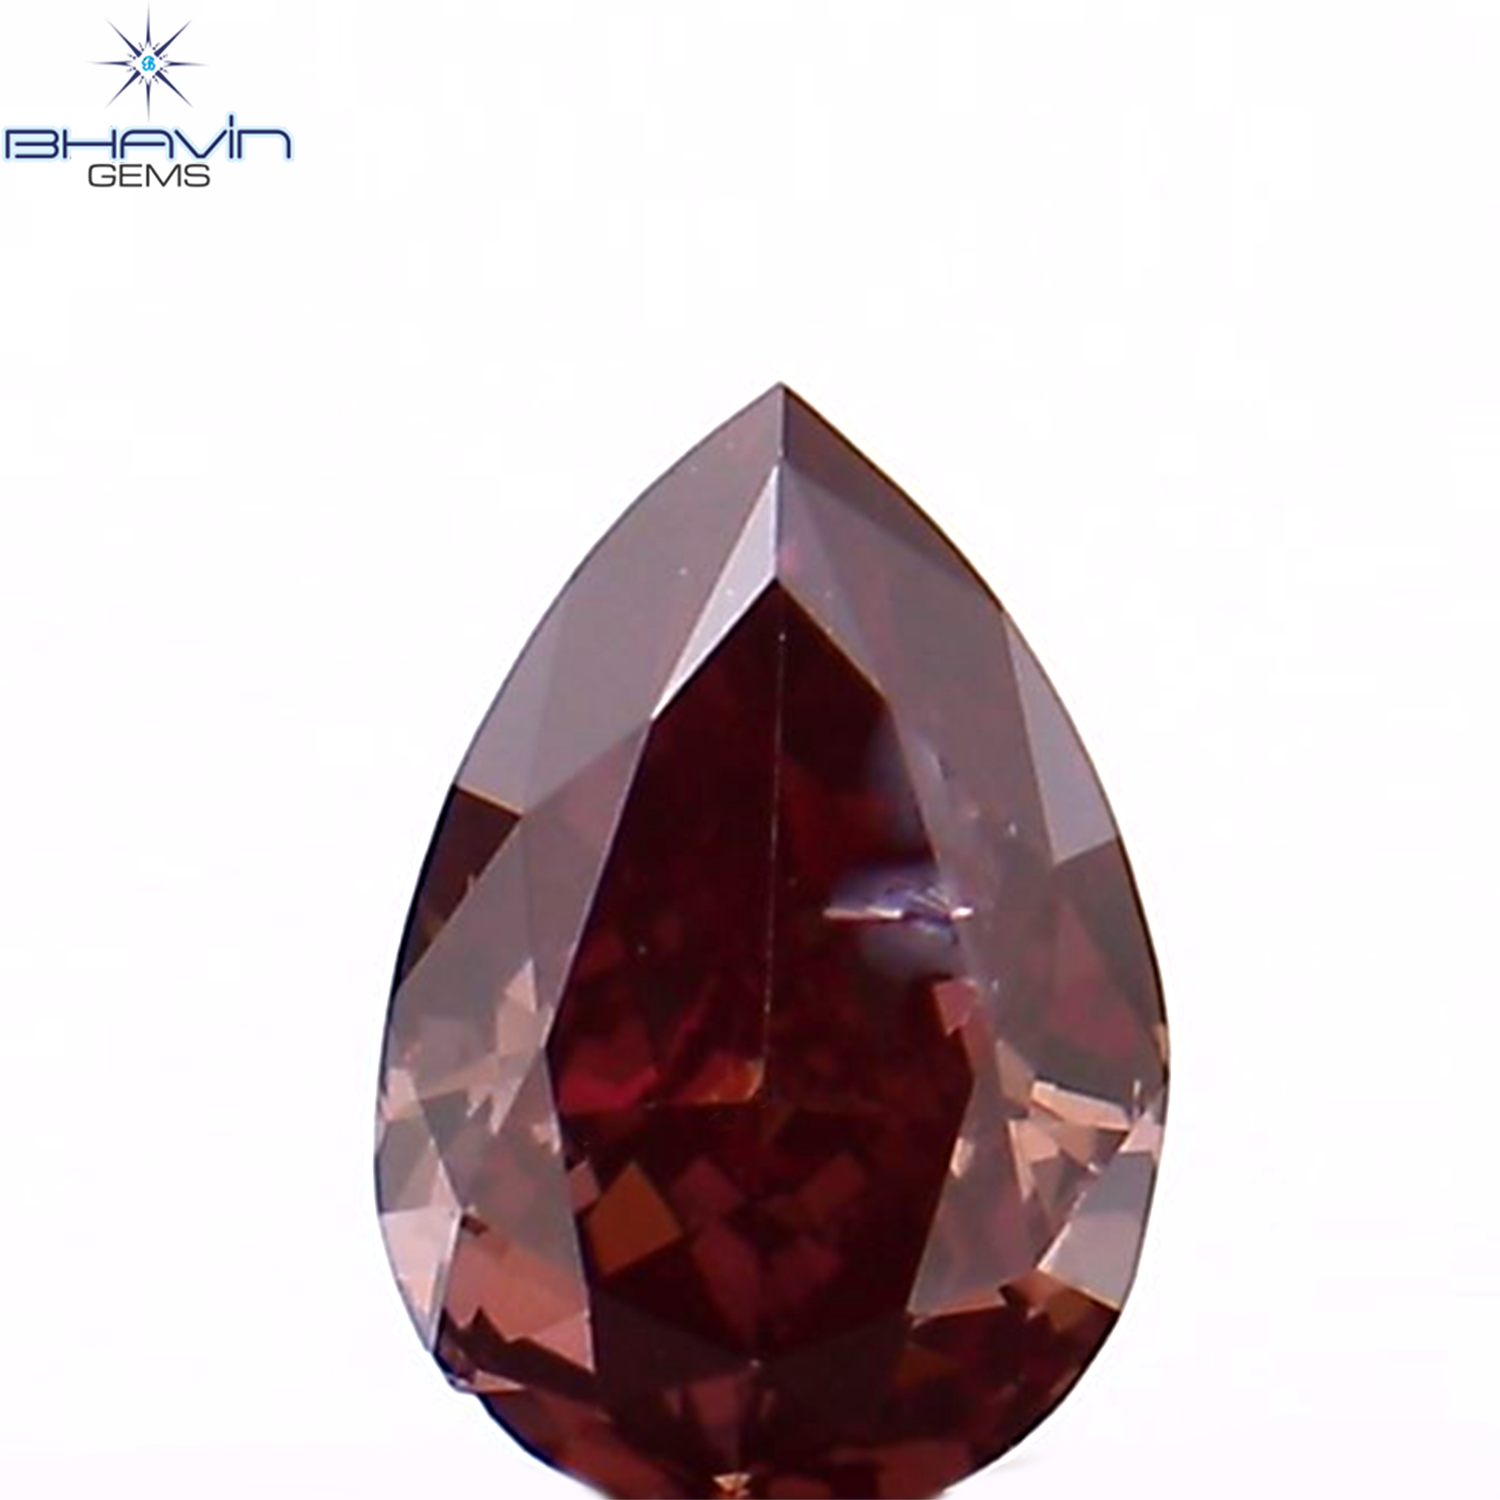 0.14 CT Pear Shape Natural Diamond Pink Color VS1 Clarity (3.90 MM)